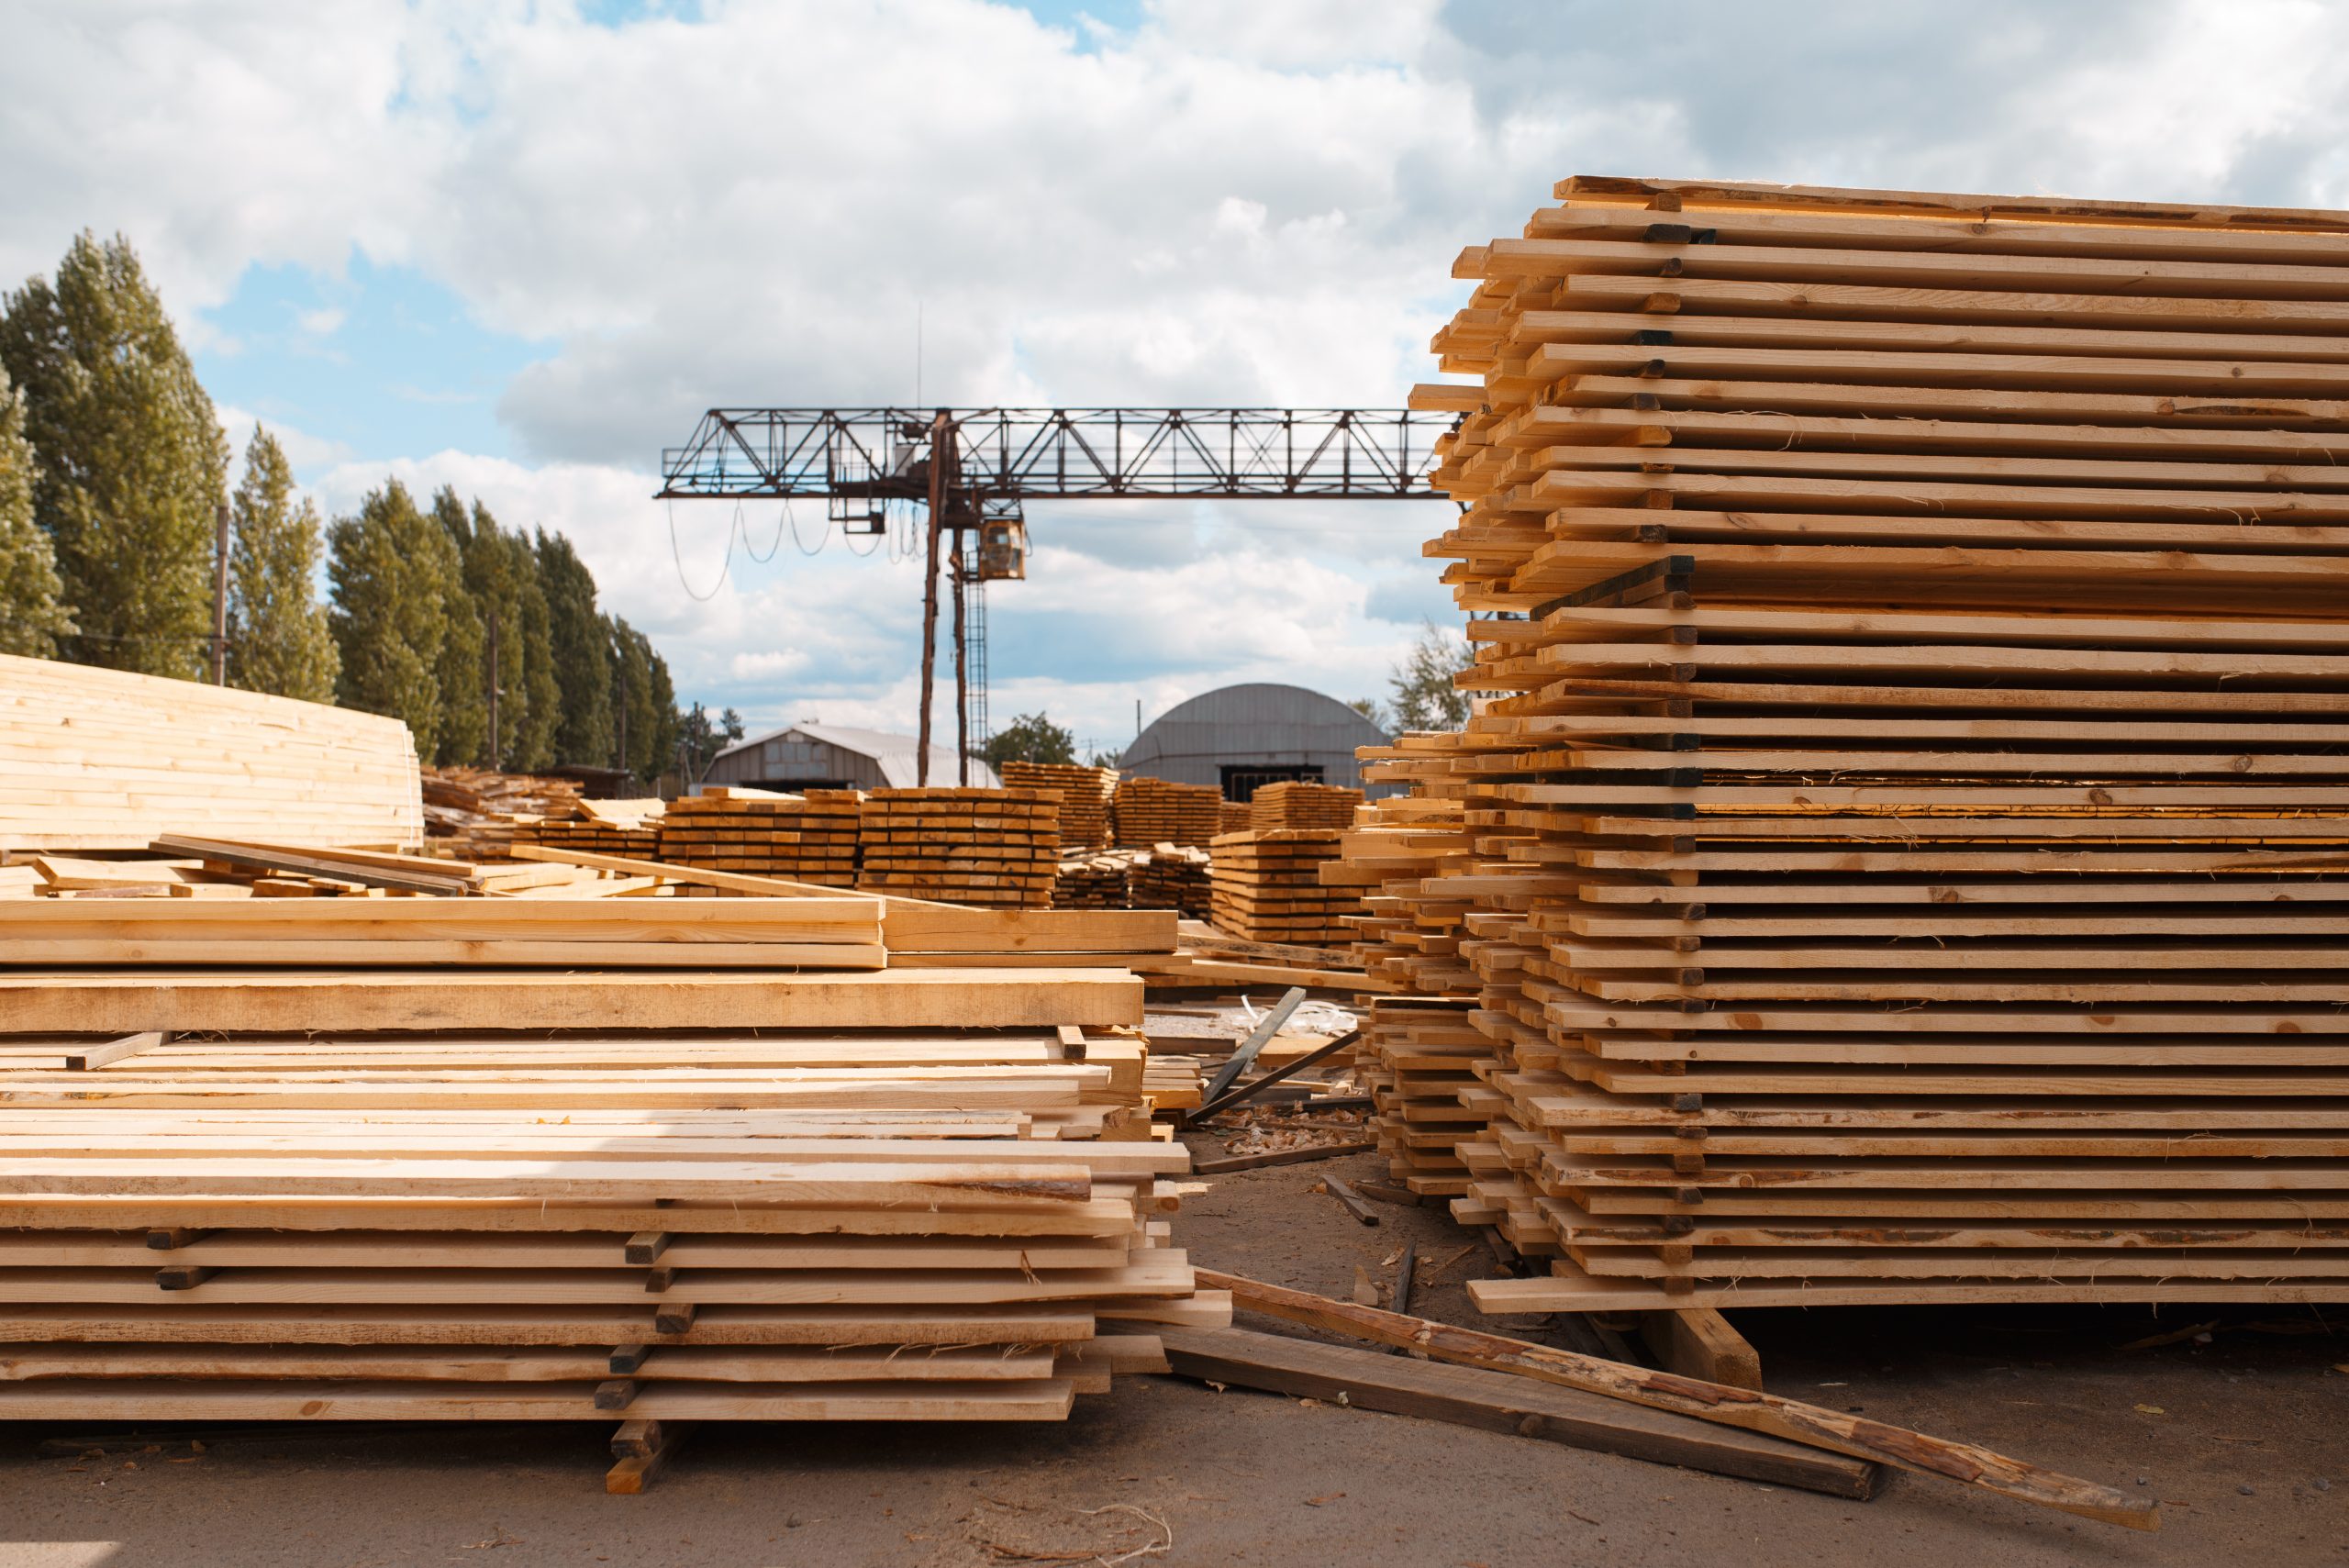 Stacks of boards on timber mill warehouse for timber grading